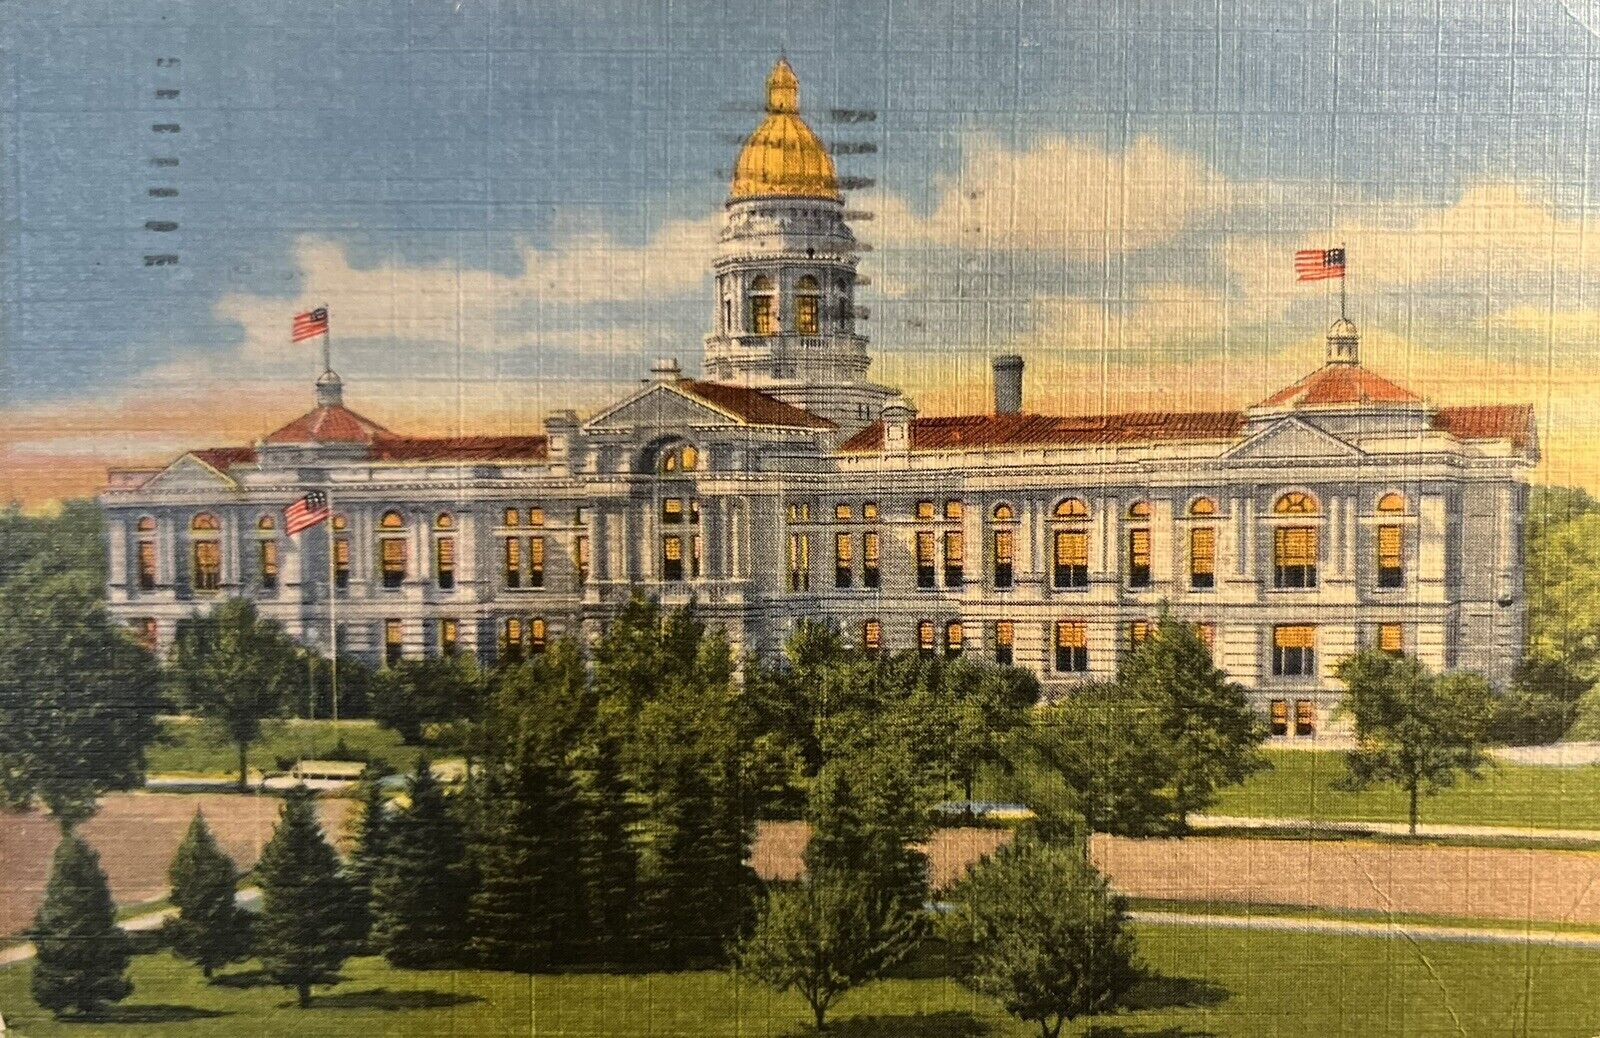 State Capitol Building Cheyenne Wyoming Built 1887 Vintage Postcard WY 1953